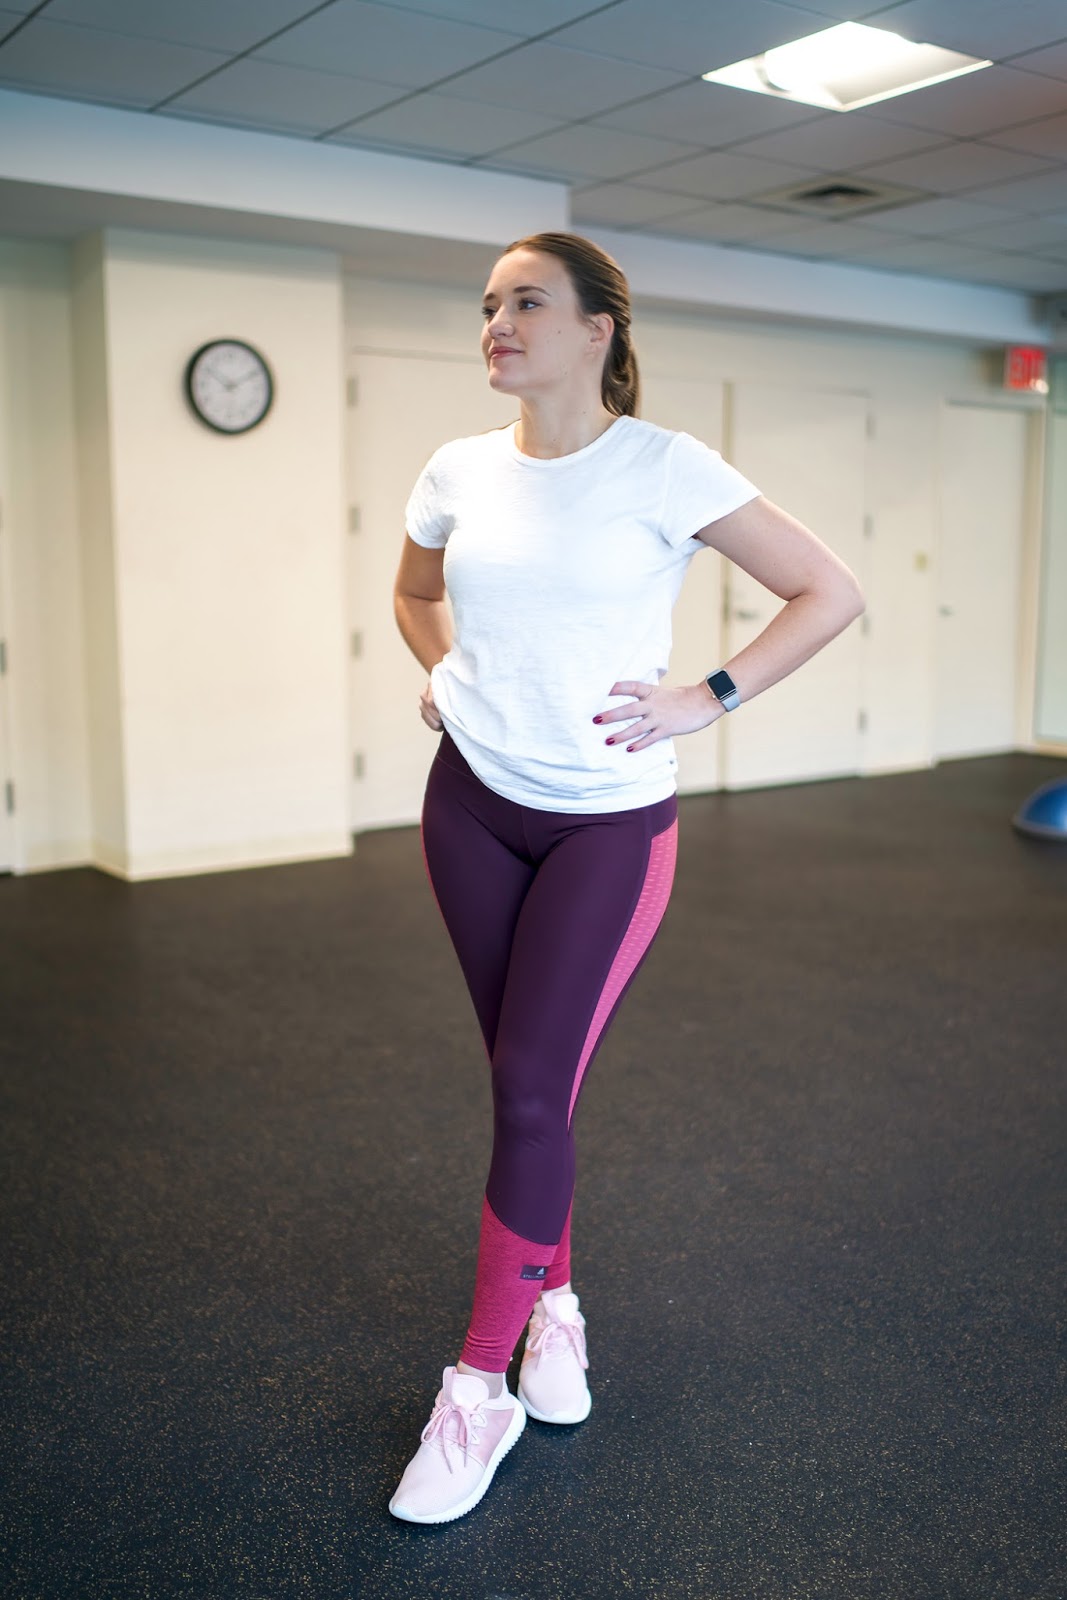 All About Work Out Motivation by popular New York lifestyle blogger Covering the Bases